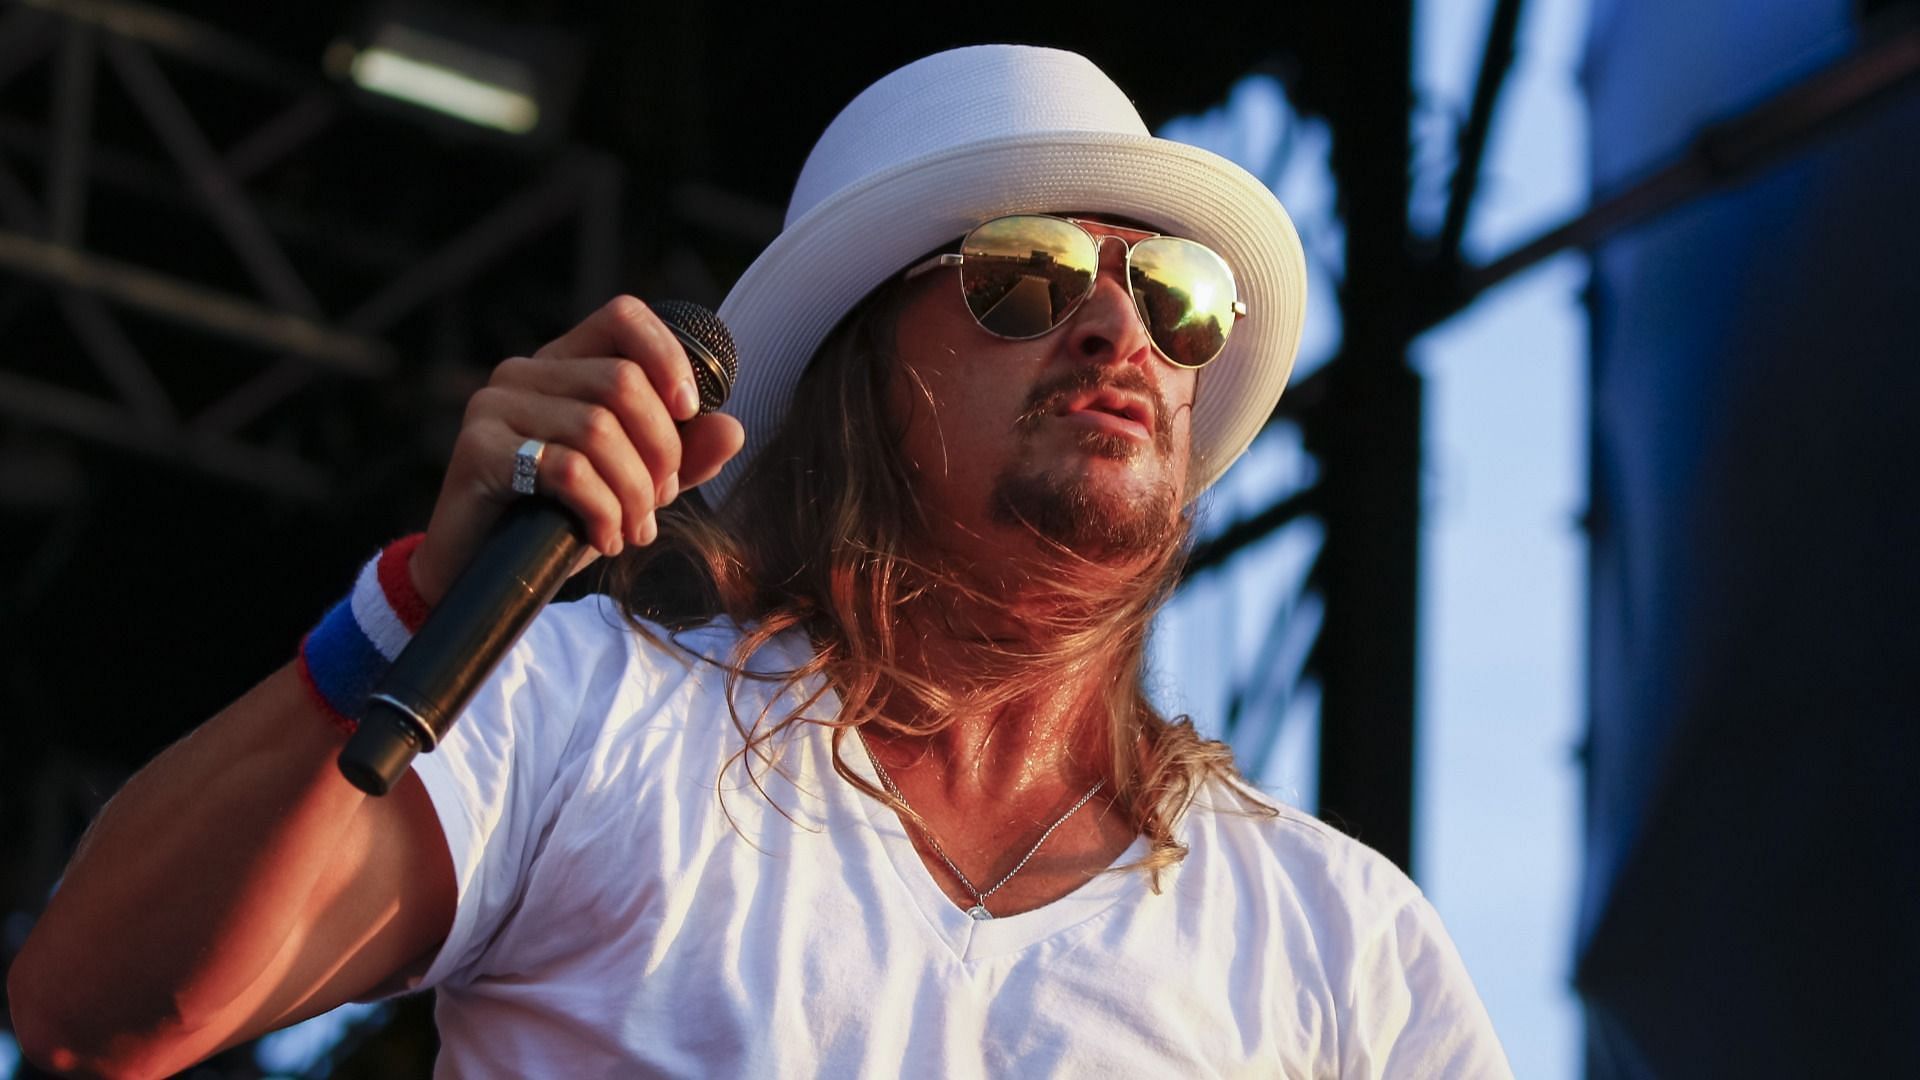 Kid Rock has dissed President Joe Biden and Dr. Anthony Fauci in his new track &quot;We the People&quot; (Image via Getty Images/ Michael Hickey)